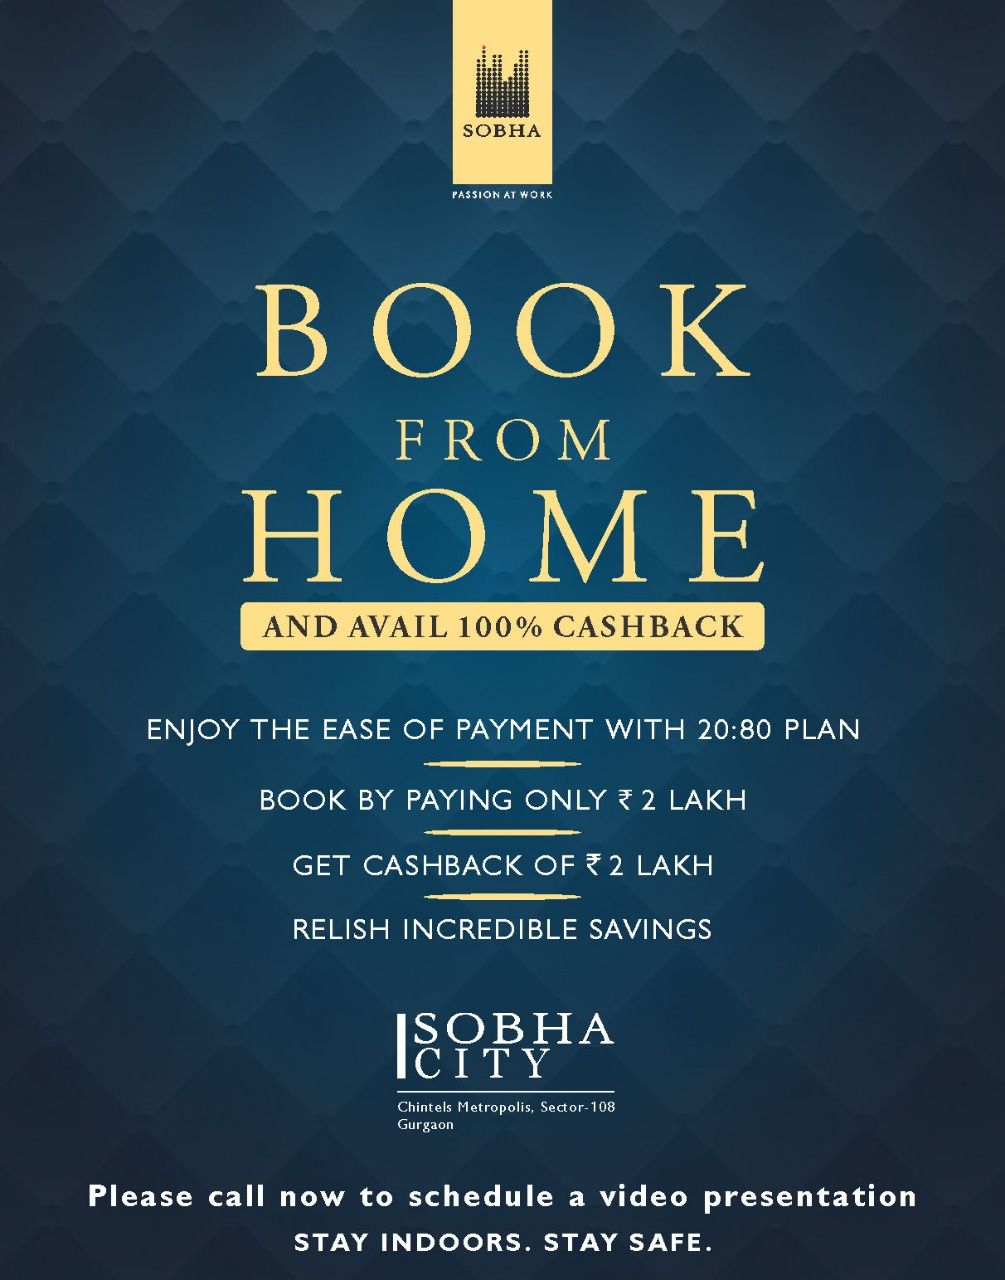 20:80 payment plan at Sobha City in Sector 108, Gurgaon